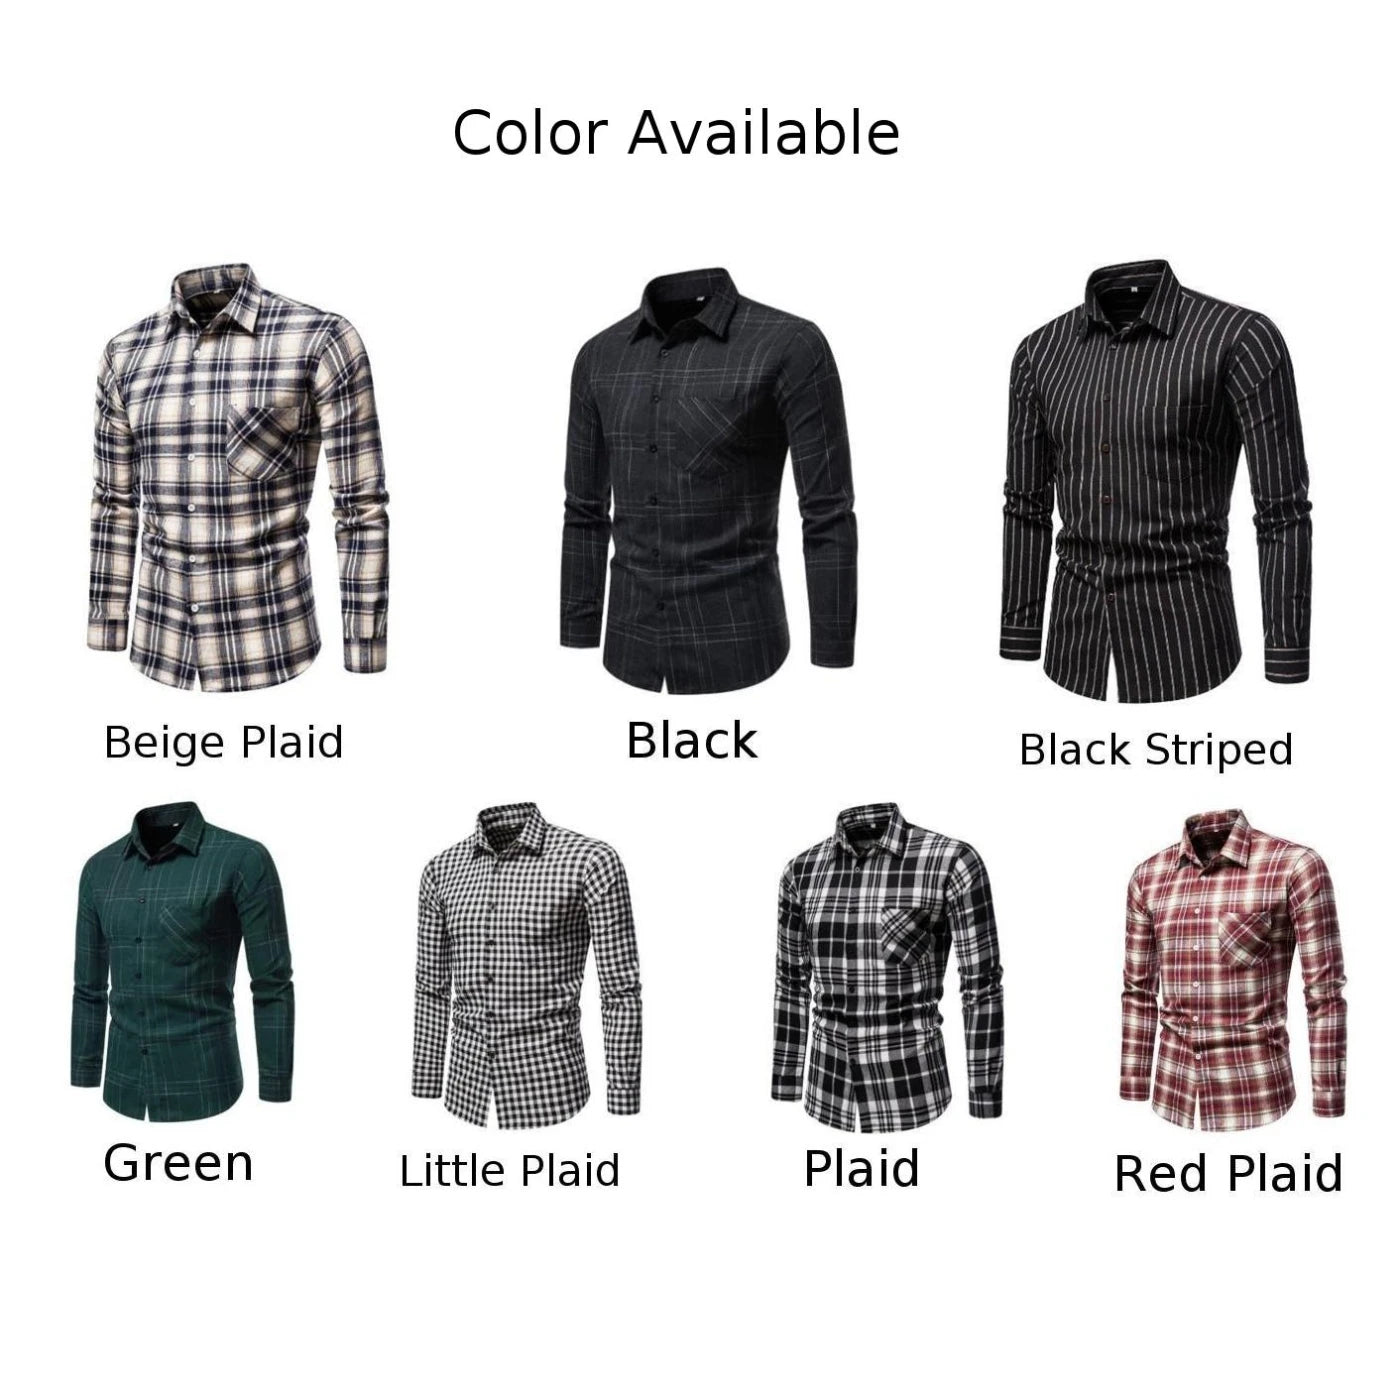 Men Casual Button Down Shirts Blouse Checkered Check Plaid Oversized Tops